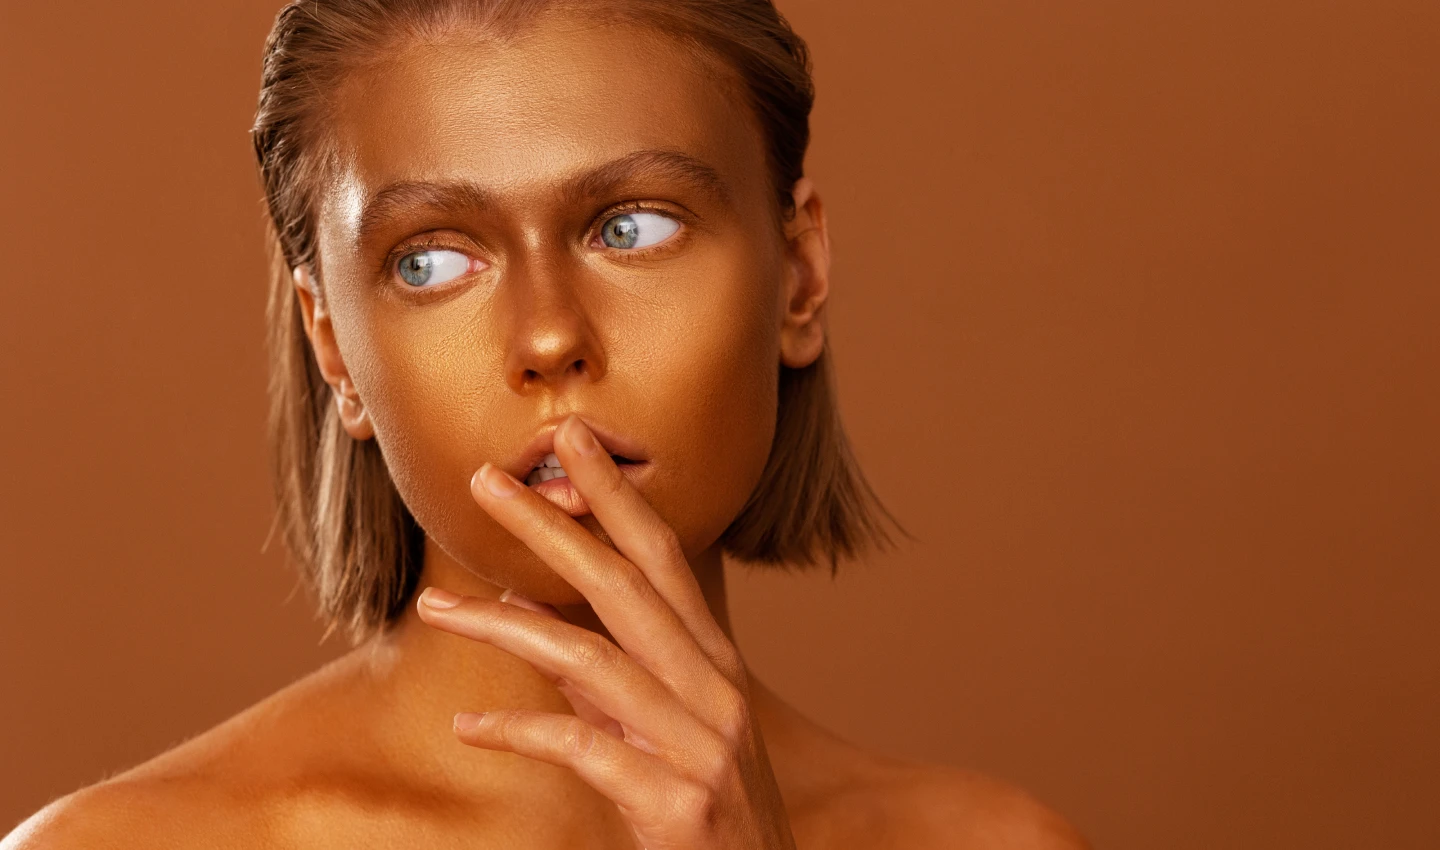 Woman with a tan face holding a bottle of fake tan, representing the skincare benefits of using fake tan.